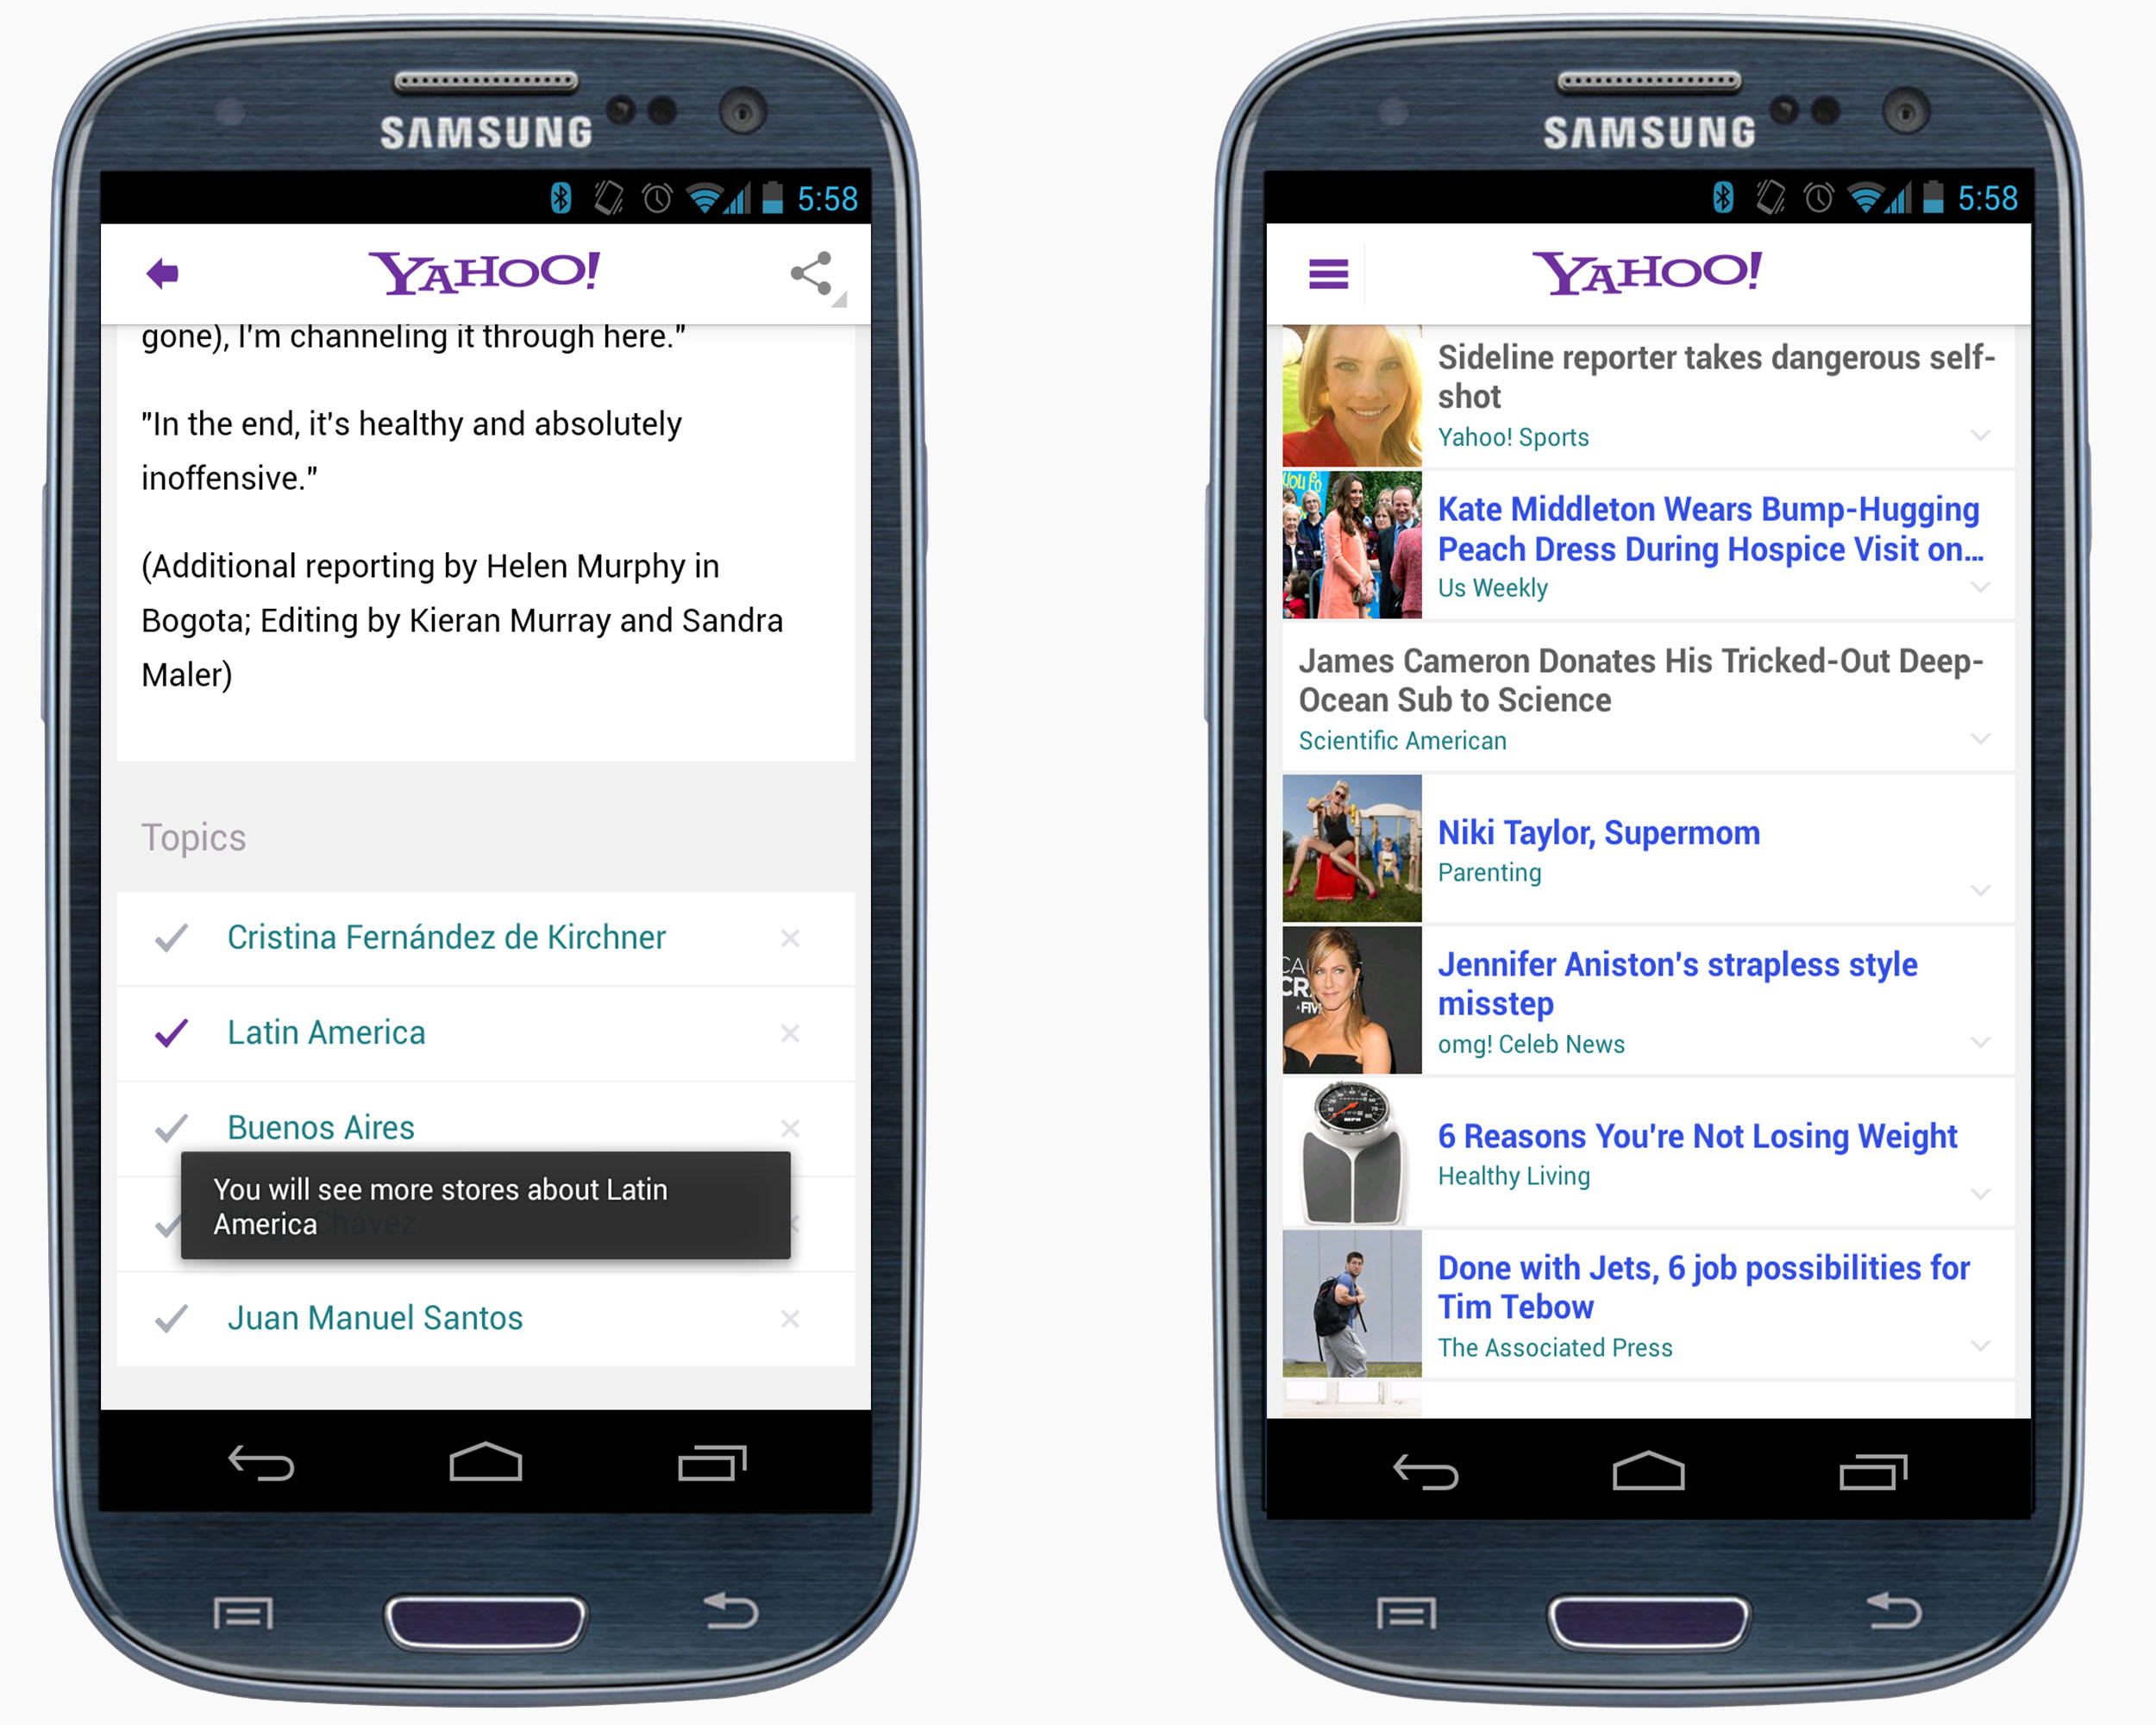 Next Up: Our Yahoo! App for Android | Product News - Yahoo